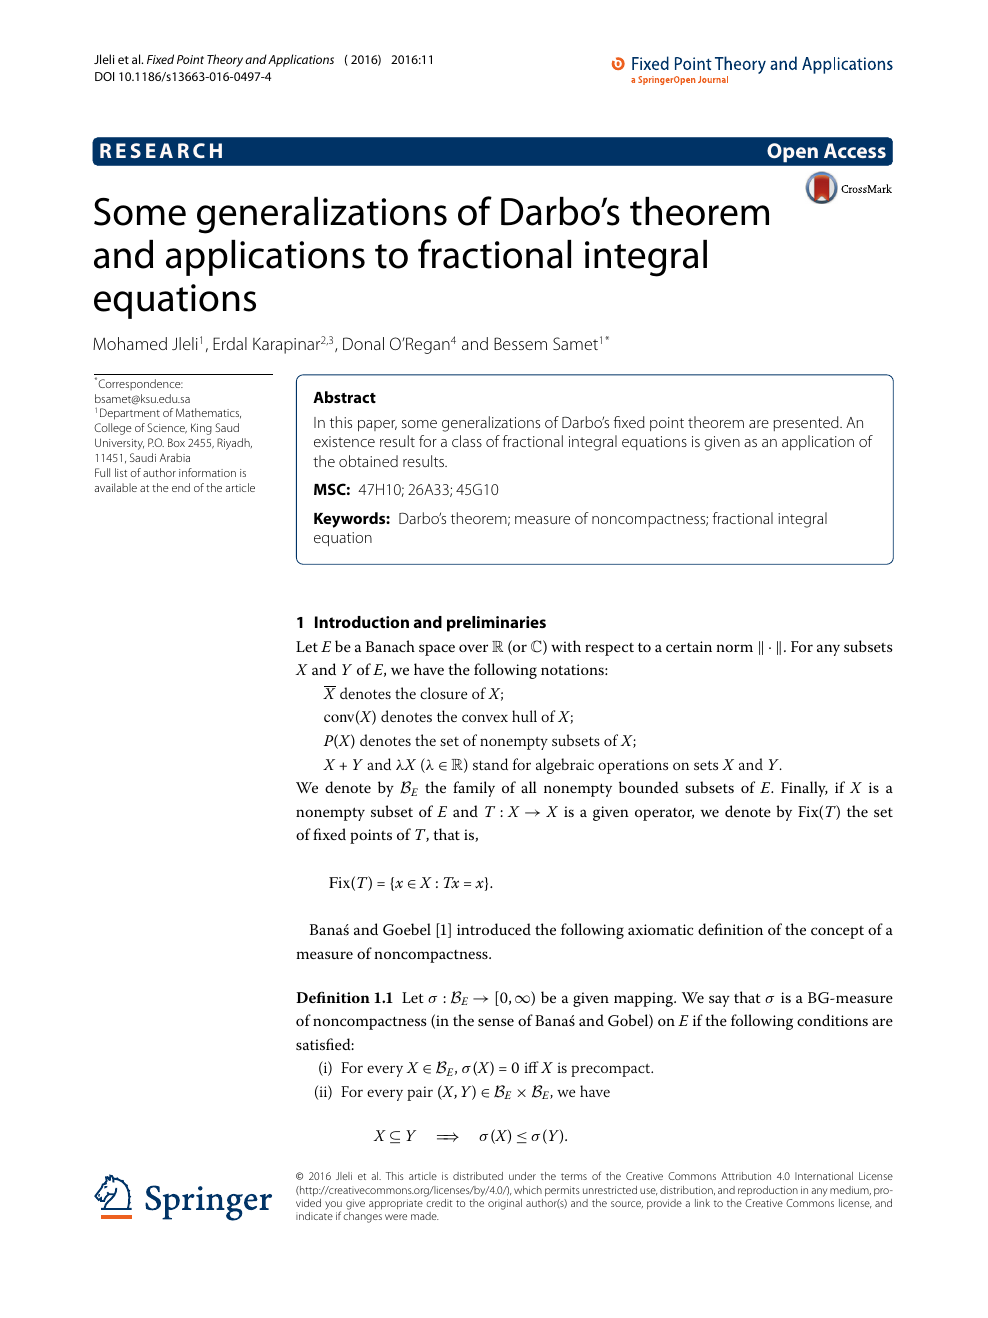 Some Generalizations Of Darbo S Theorem And Applications To Fractional Integral Equations Topic Of Research Paper In Mathematics Download Scholarly Article Pdf And Read For Free On Cyberleninka Open Science Hub